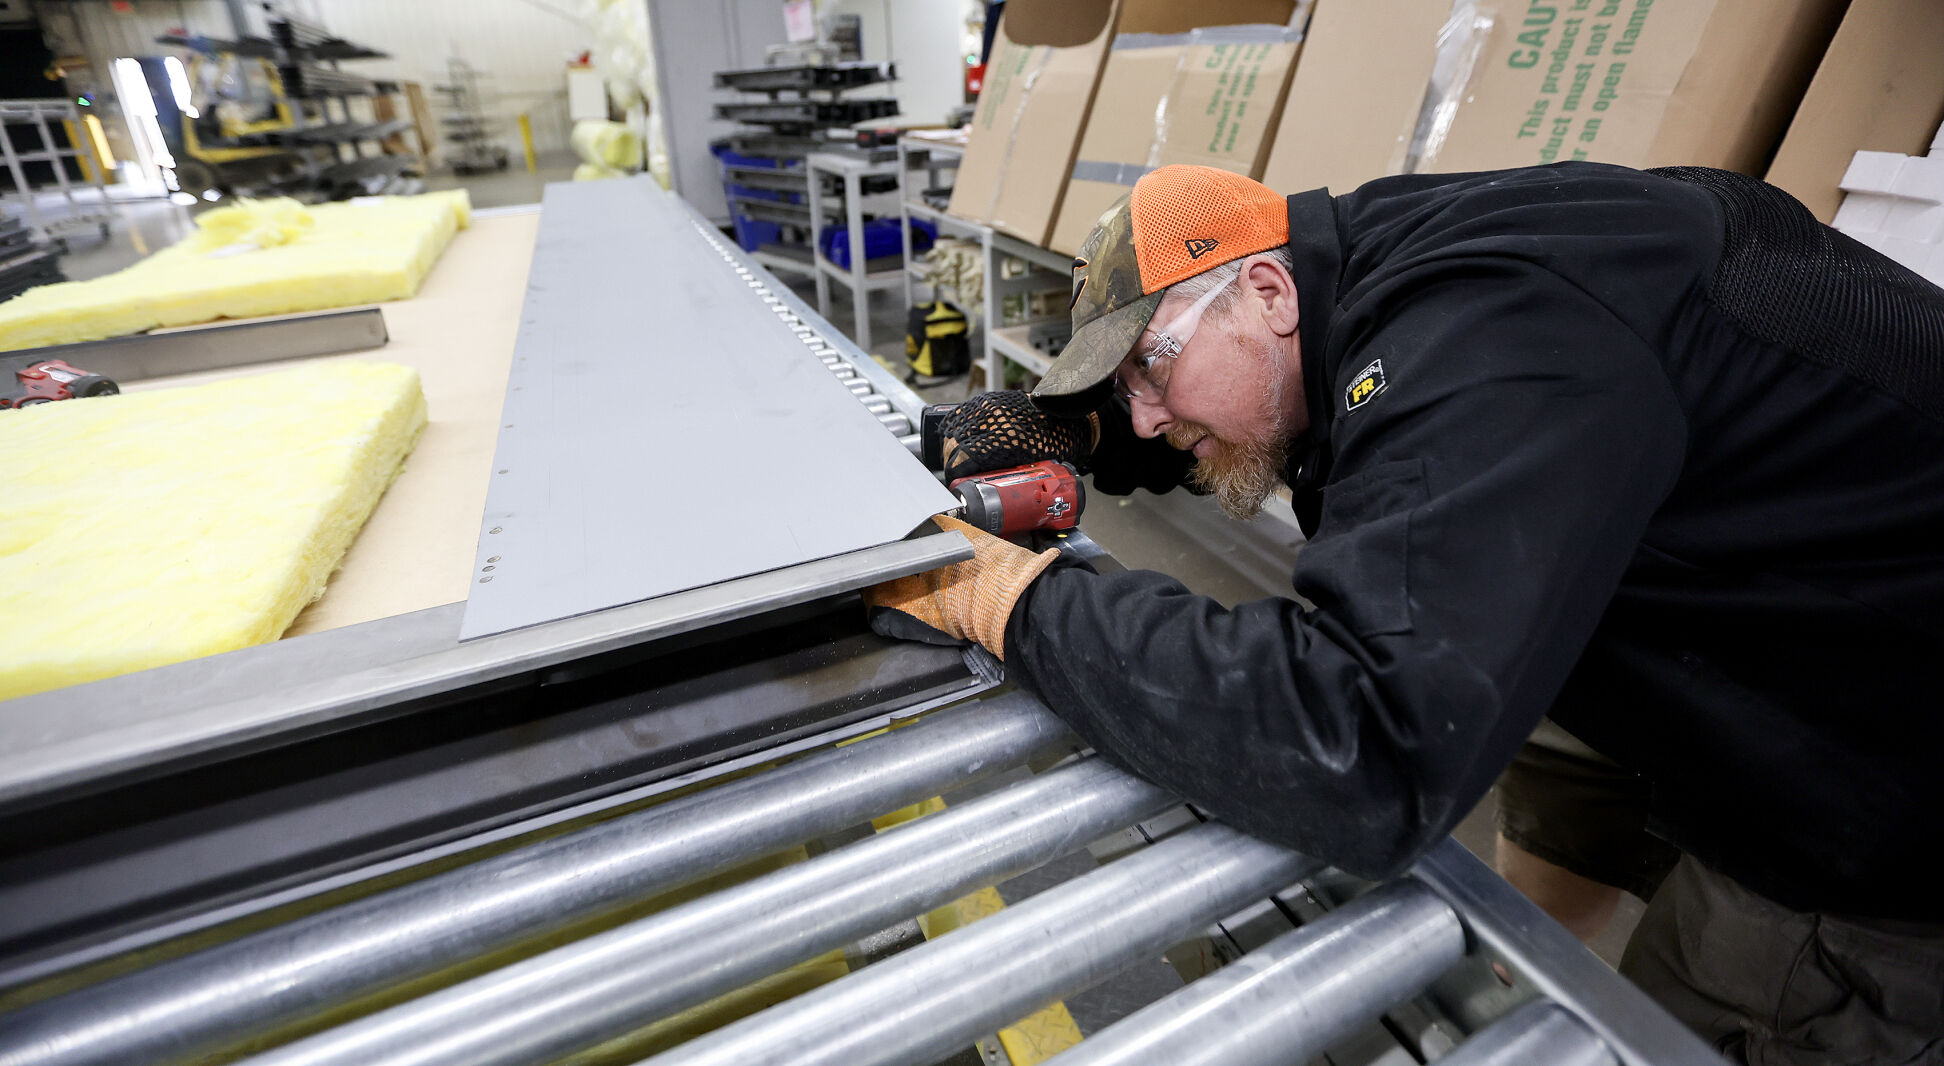 Employee Mike Ernzen puts together a product.    PHOTO CREDIT: Dave Kettering